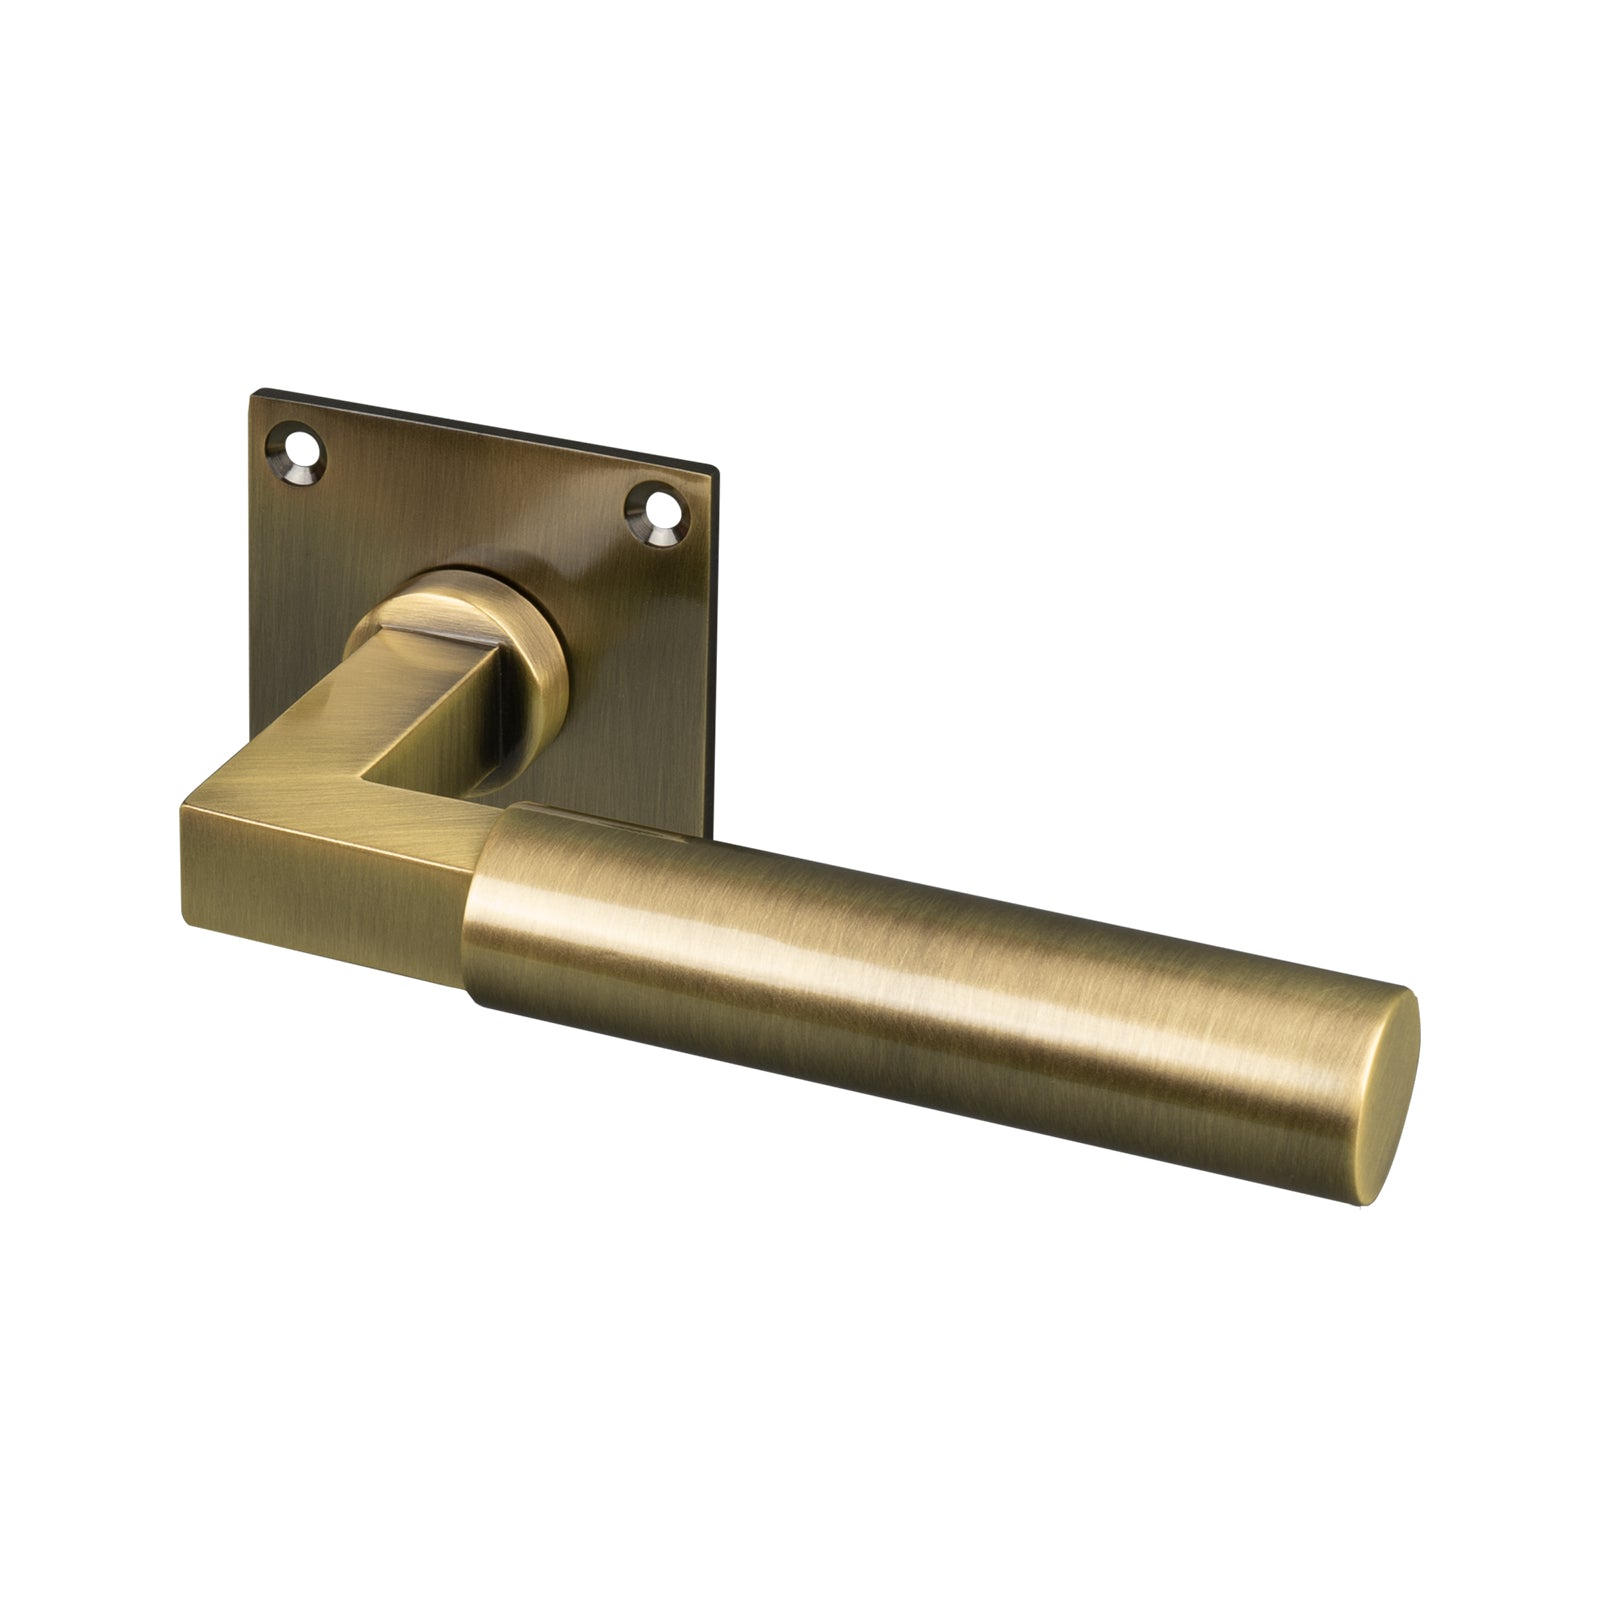 aged brass bauhaus low profile square rose door handles, lever on rose SHOW